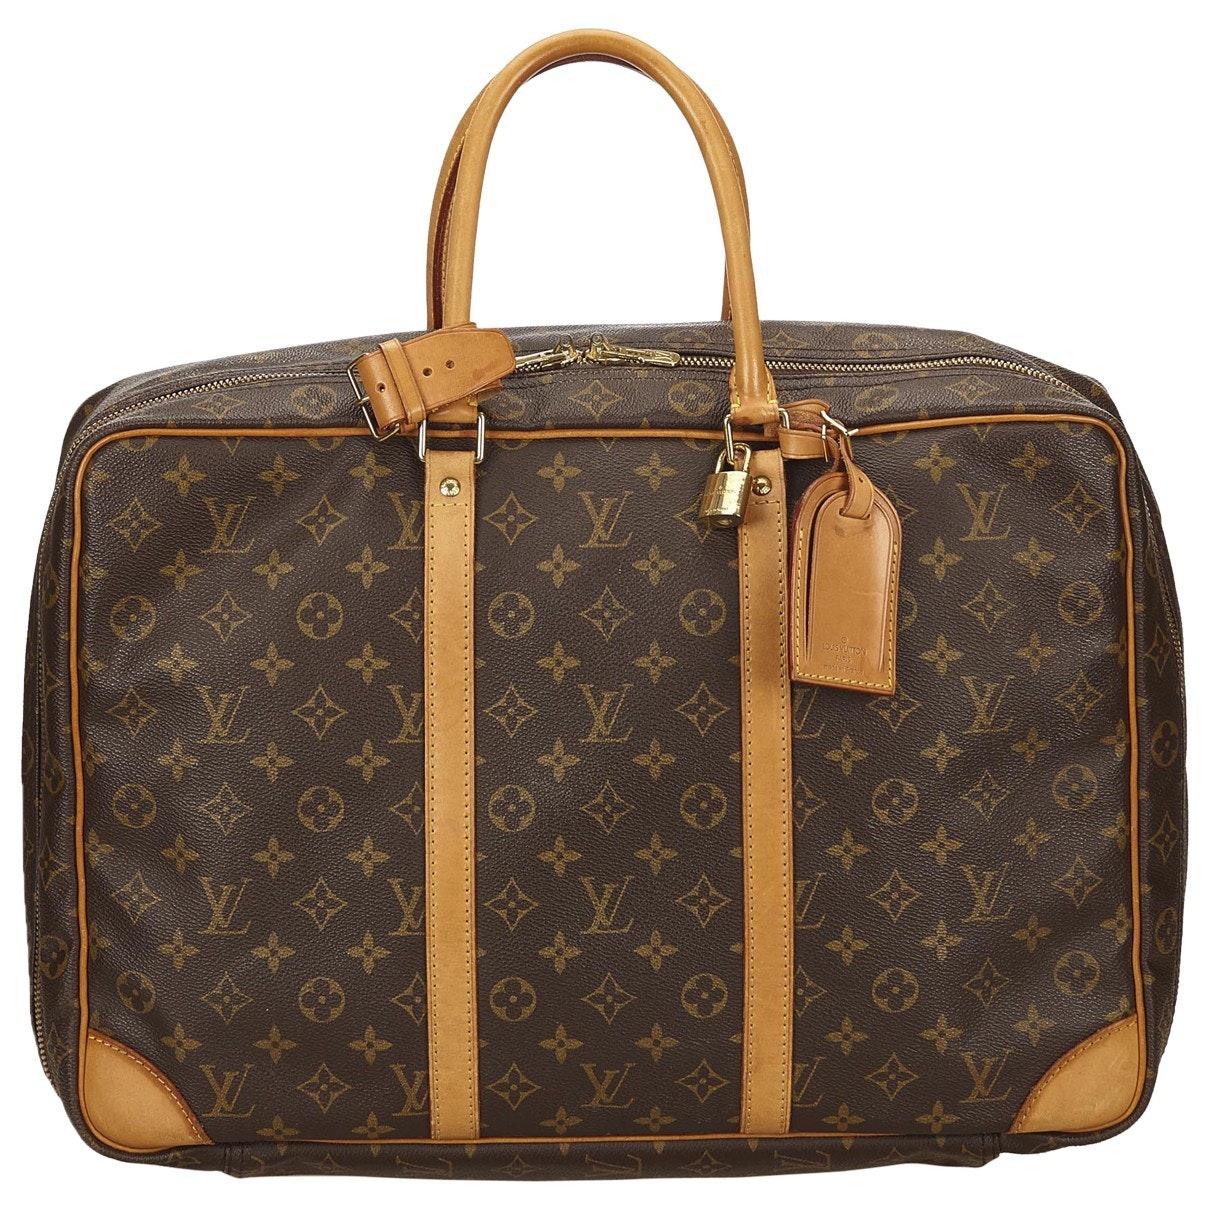 Louis Vuitton Canvas Pre-owned Travel Bag in Brown - Lyst